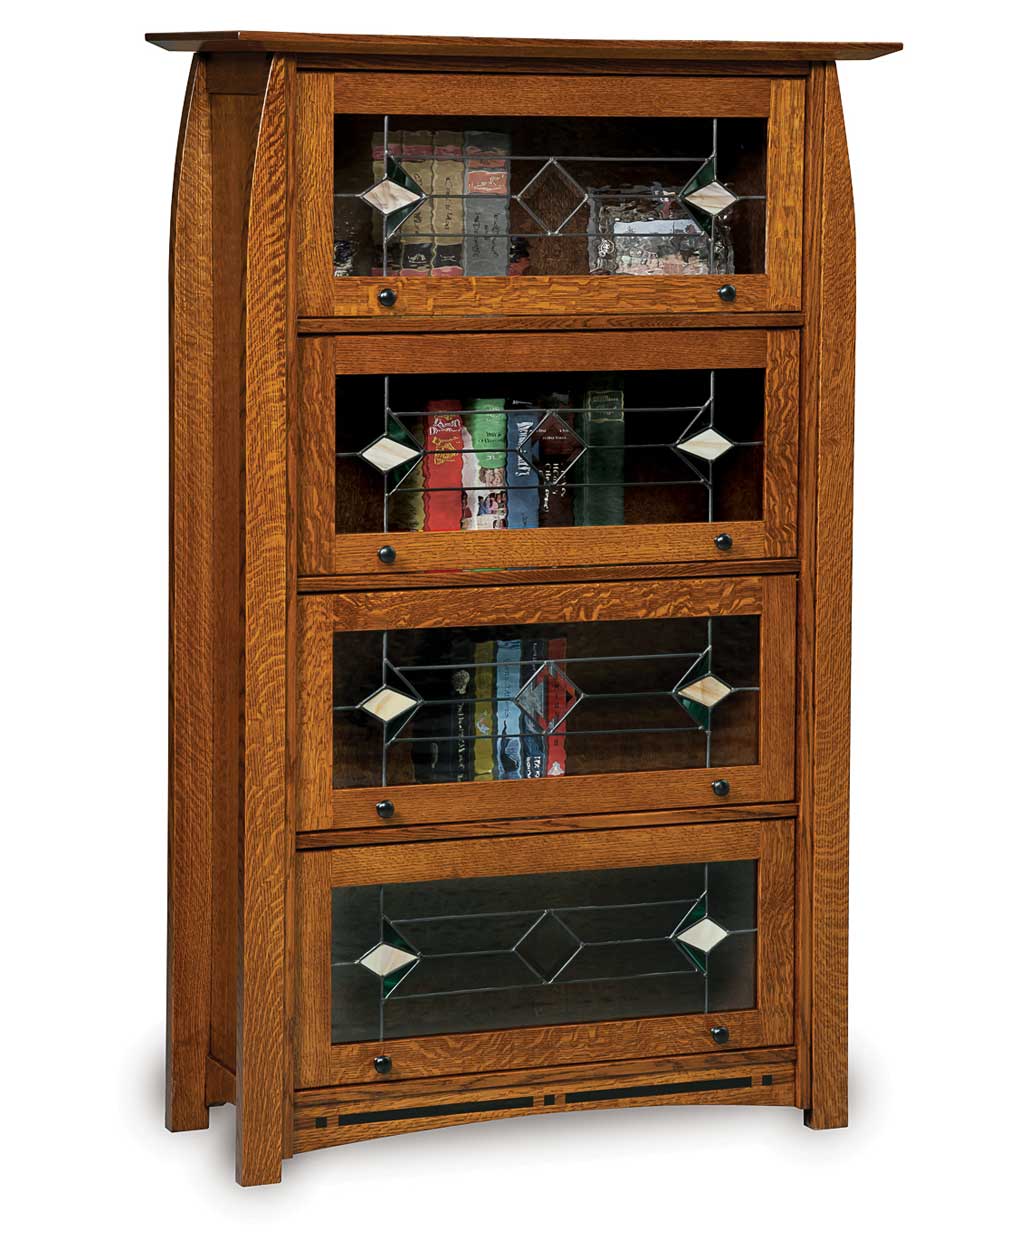 Modern Barrister Bookcase for Large Space